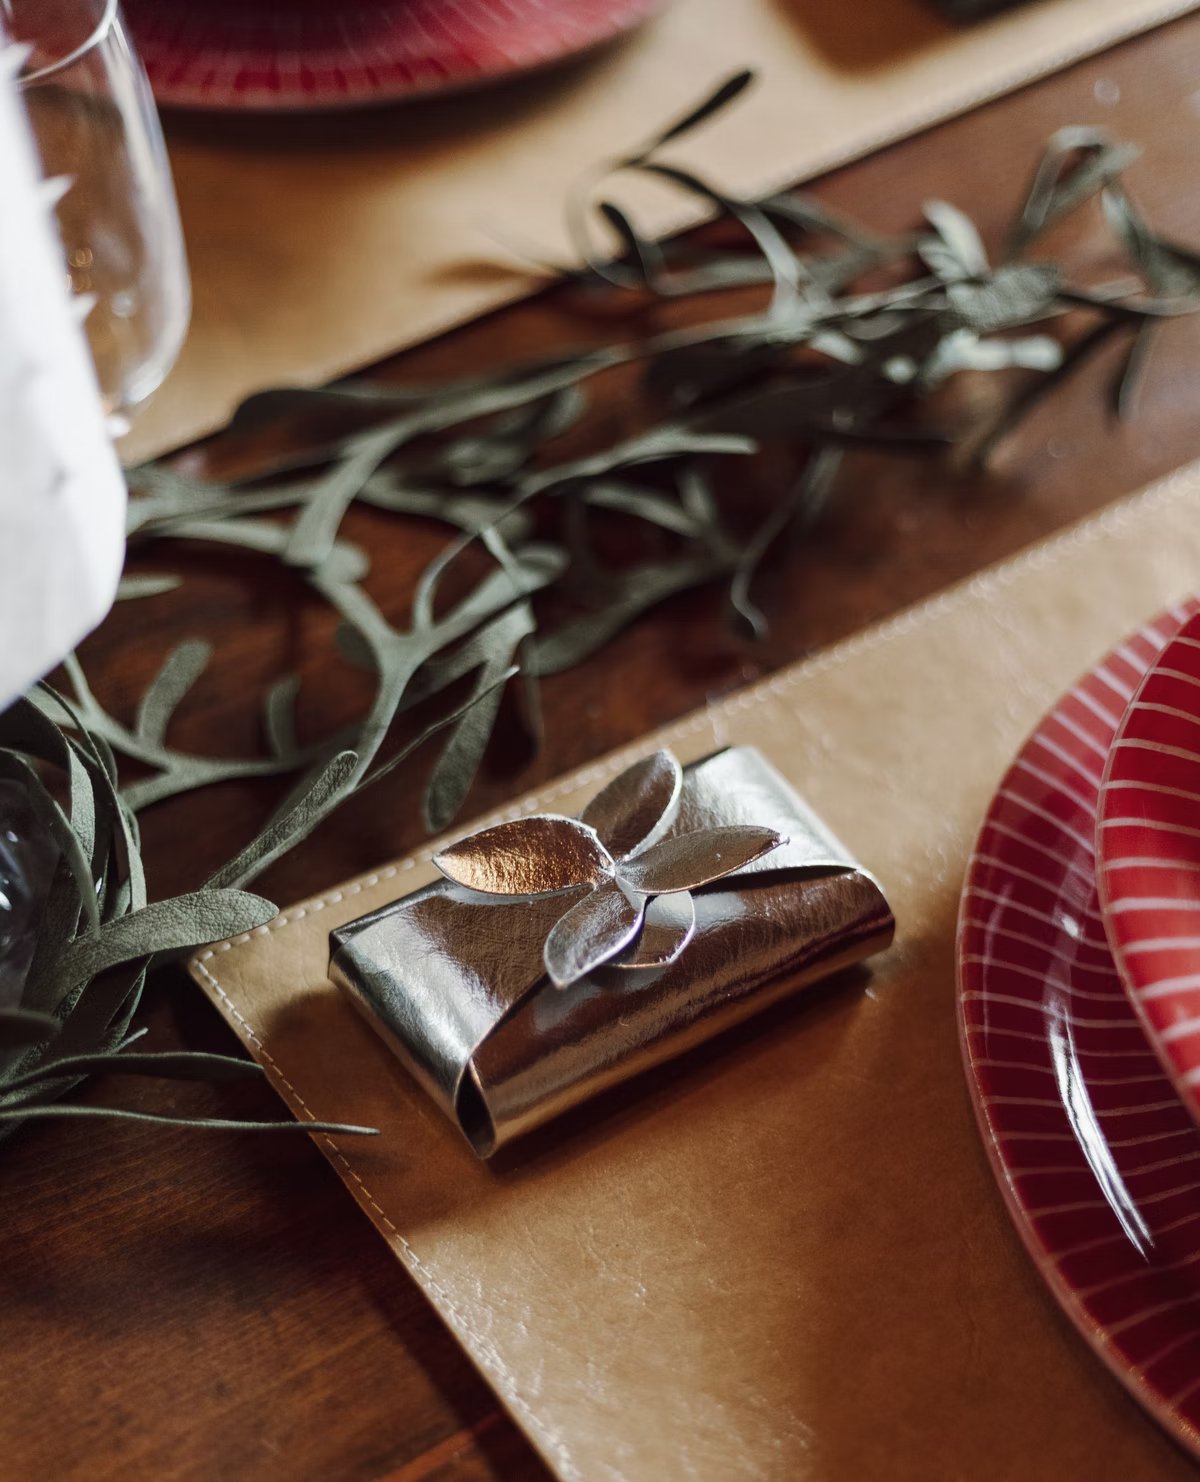 A wooden dining table is shown in close up. The table is set with tan washable paper placemats and red dishes. On one of the placemats is a metallic dark grey soap holder, closed with a petal fastening.